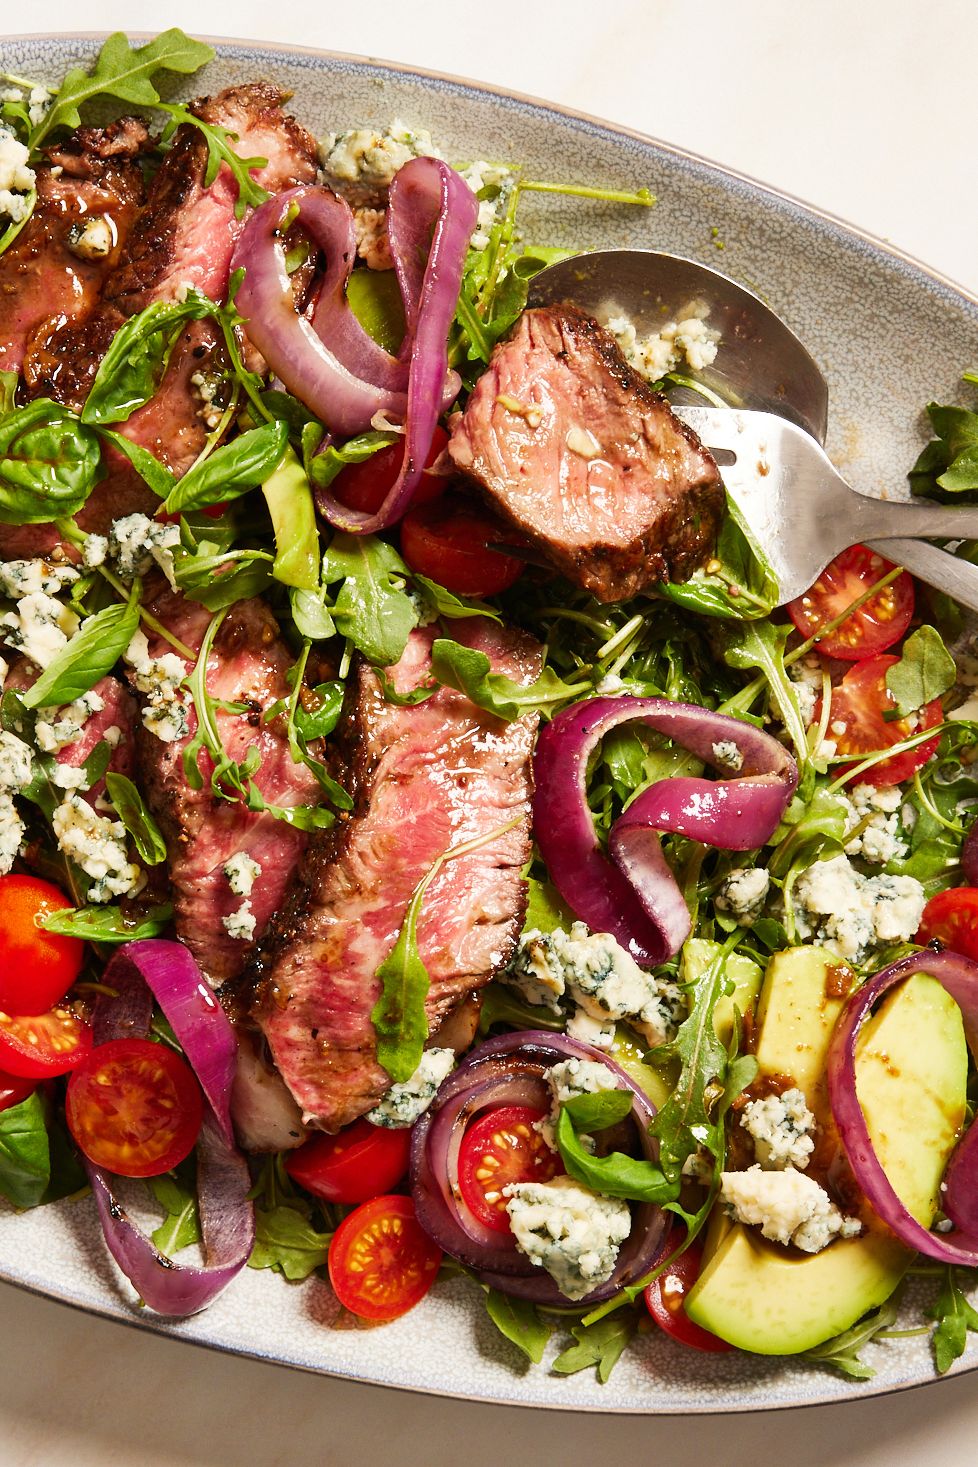 75 Best Grilled Dinners - Easy Ideas For Dinner On The Grill